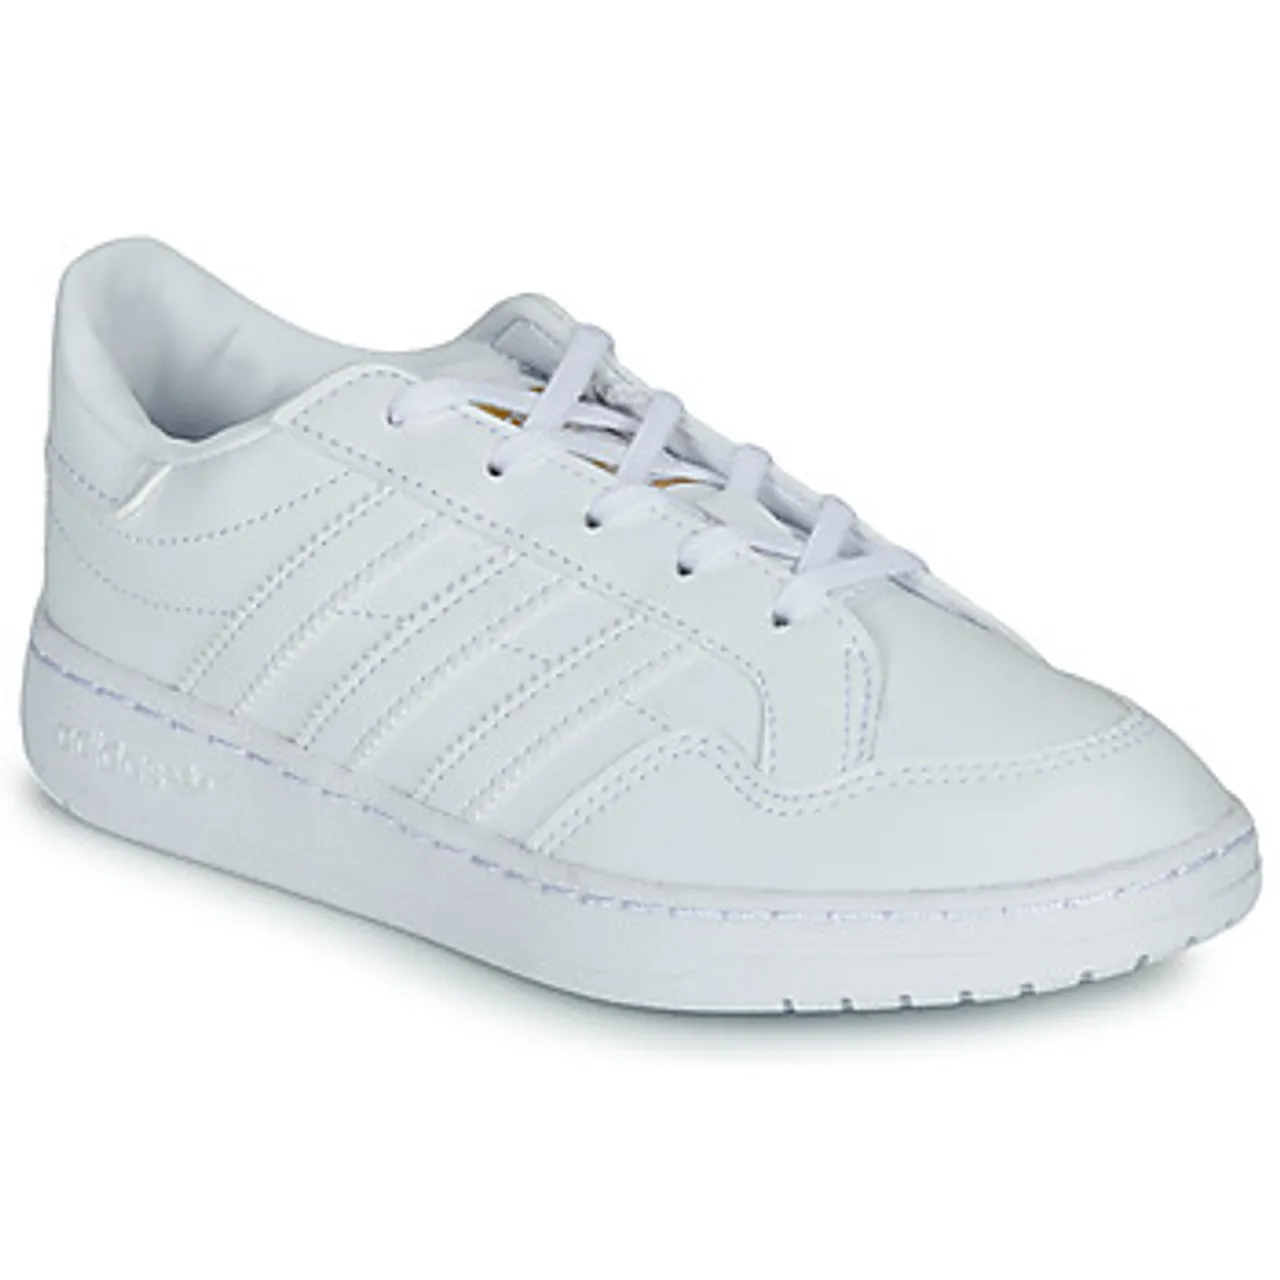 adidas  Novice C  boys's Children's Shoes (Trainers) in White